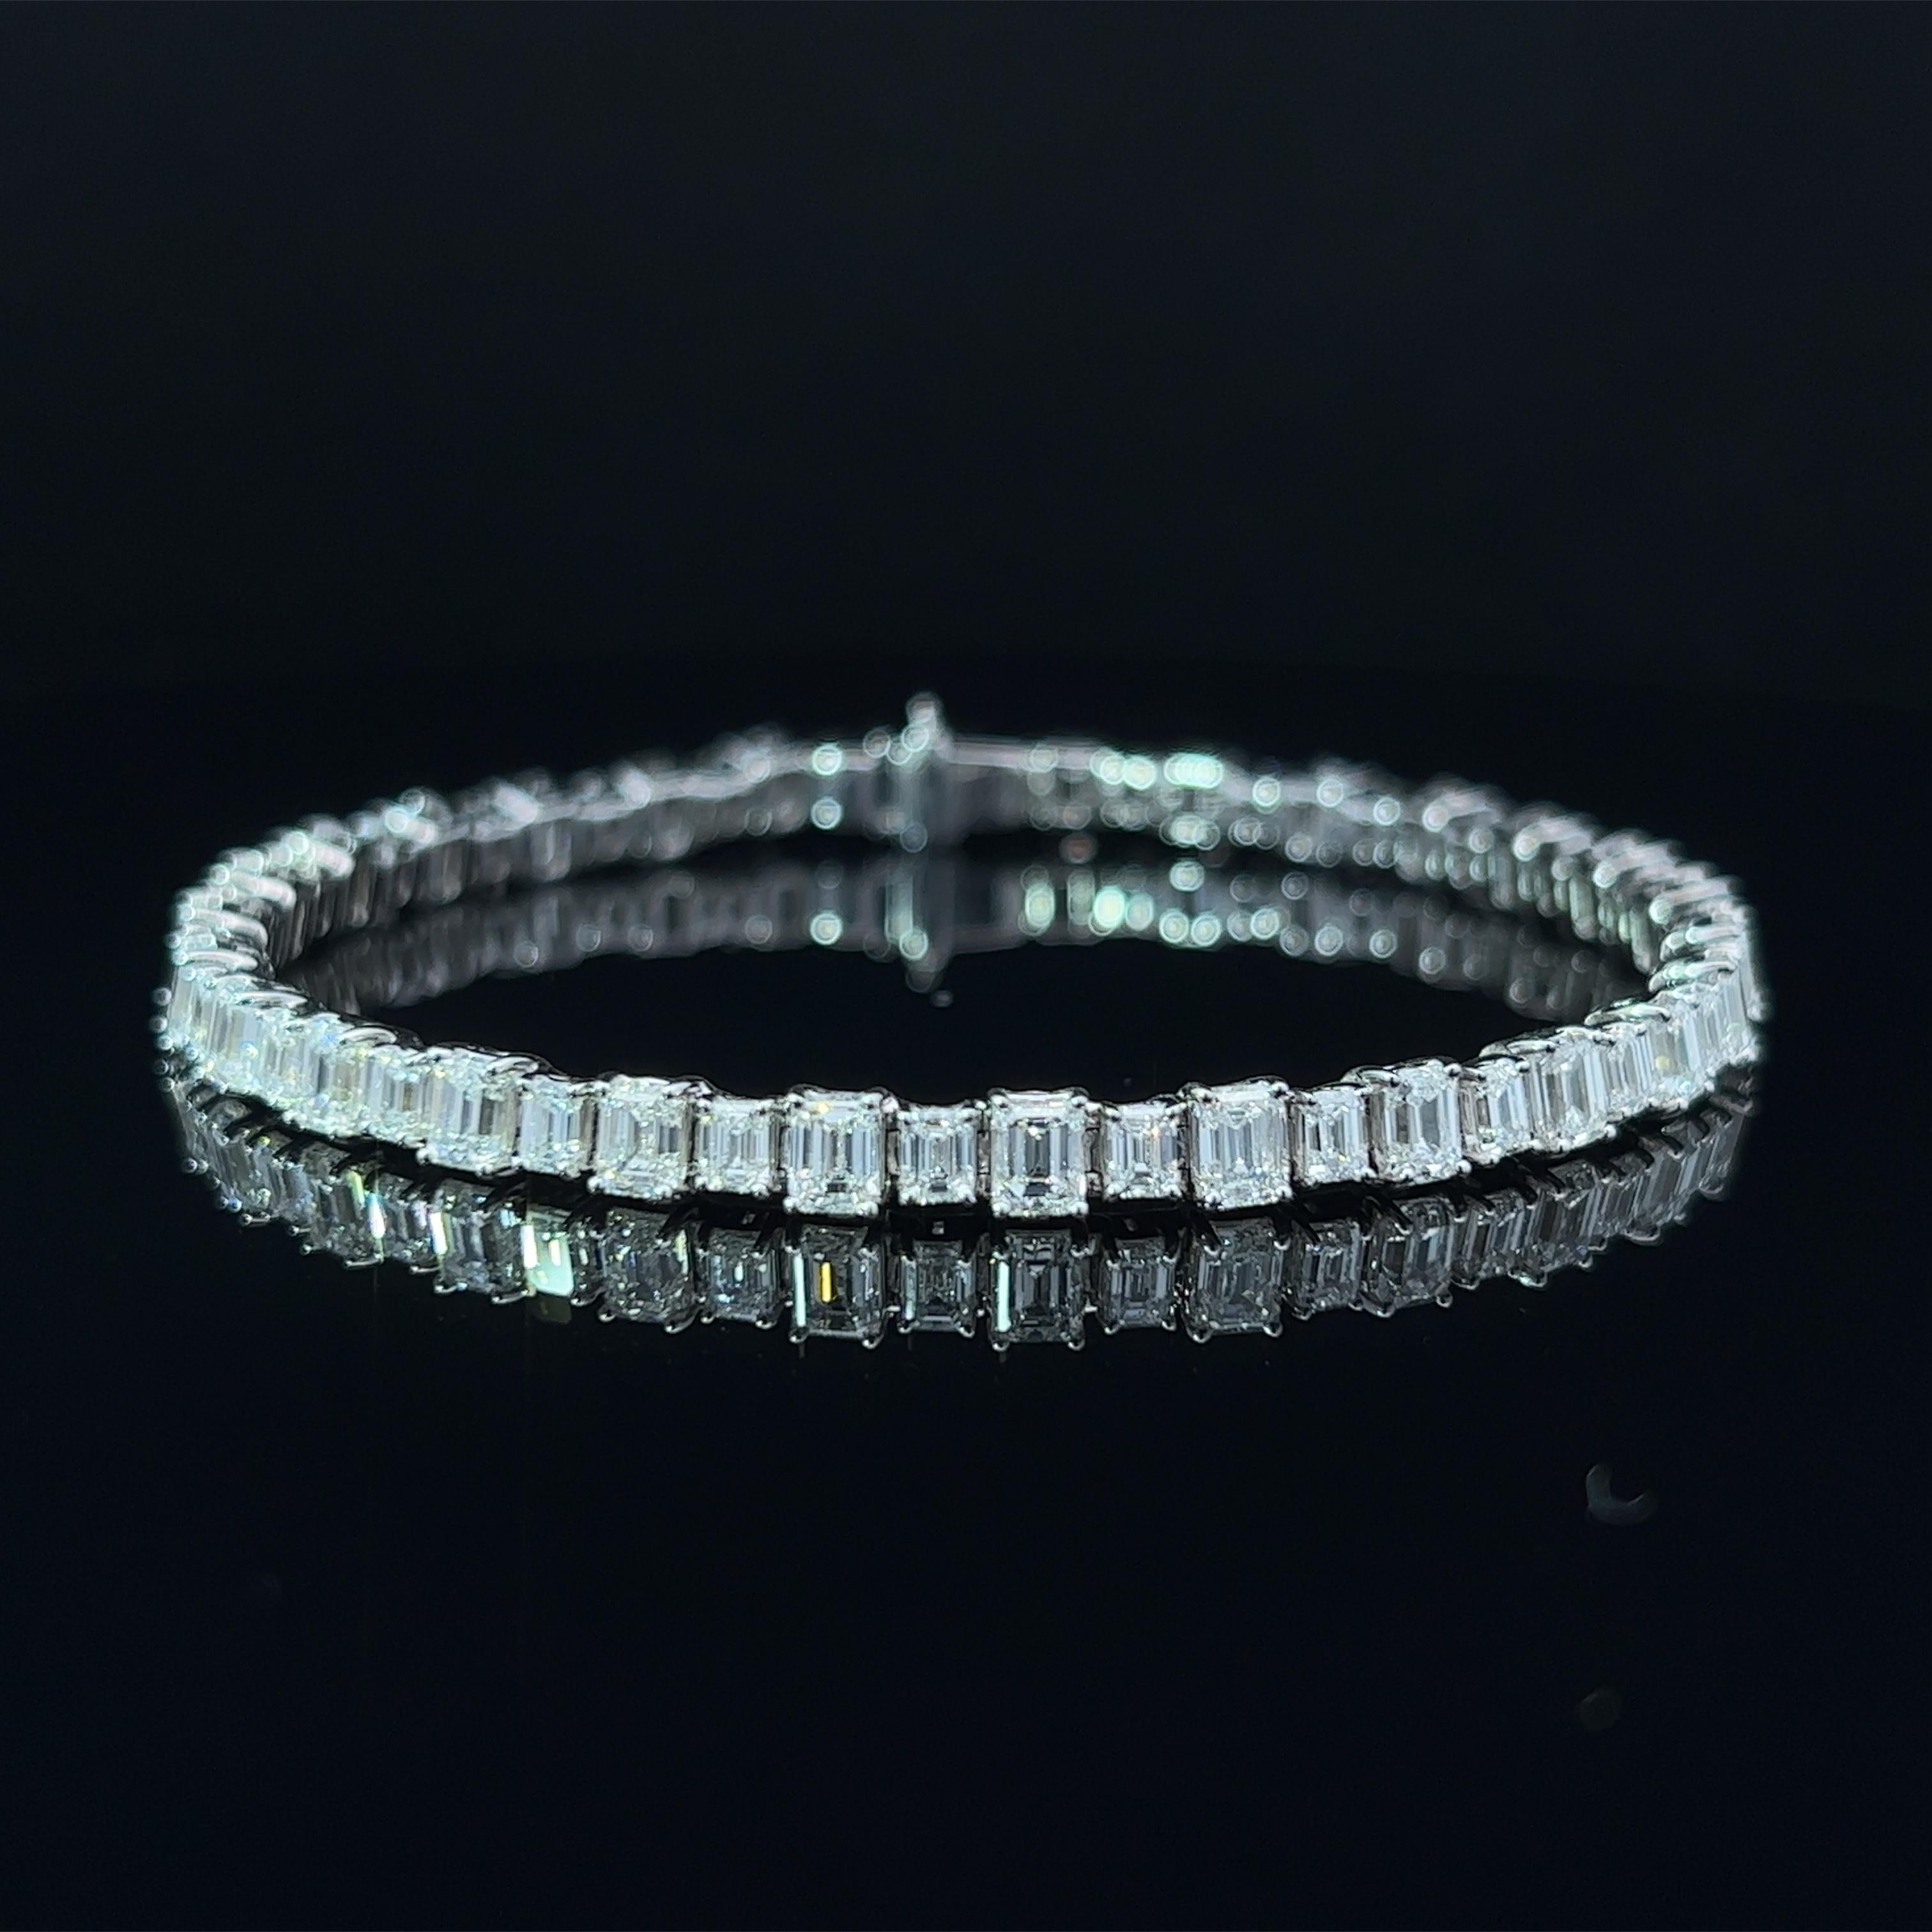 Diamond Shape: Emerald Cut  
Total Diamond Weight: 9.58
Individual Diamond Weight: .25ct & 0.10ct
Color/Clarity: FG VVS  
Metal: 18K White Gold 
Metal Weight: 14.61g

Key Features:

Emerald-Cut Diamonds: The centerpiece of this bracelet is a